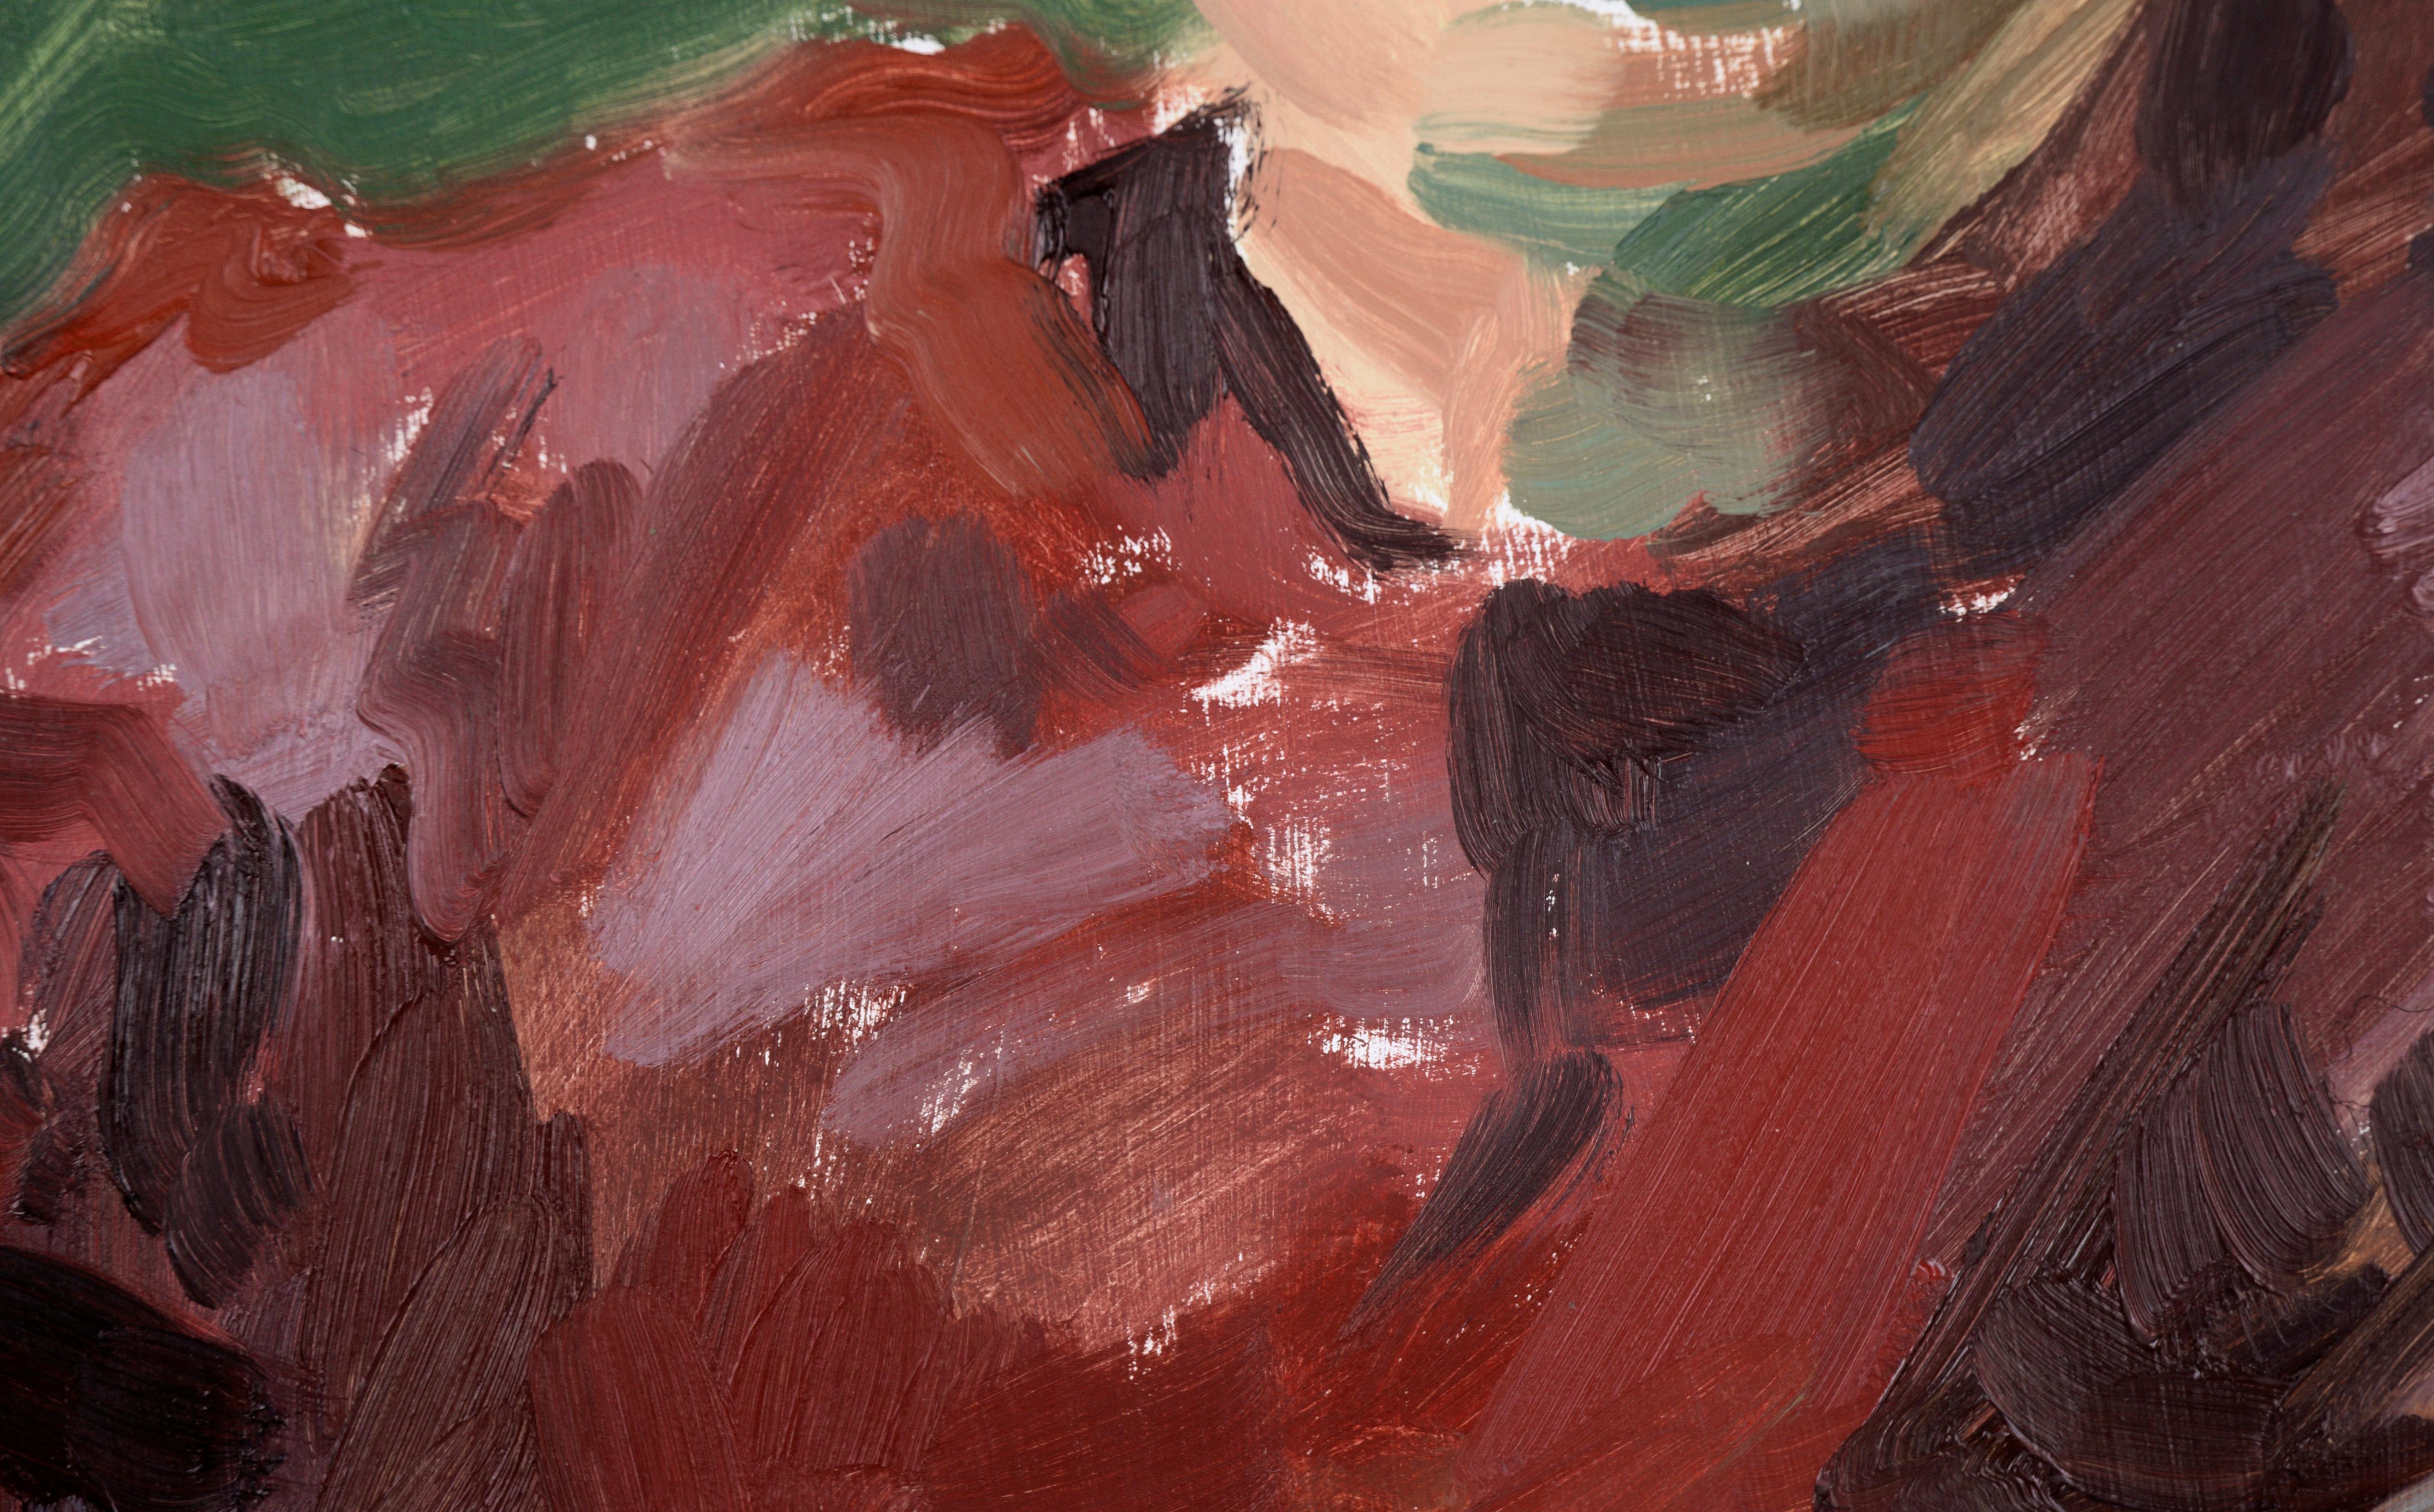 Portrait of a Woman in Red - Bay Area Figurative School Abstract Expressionist For Sale 2